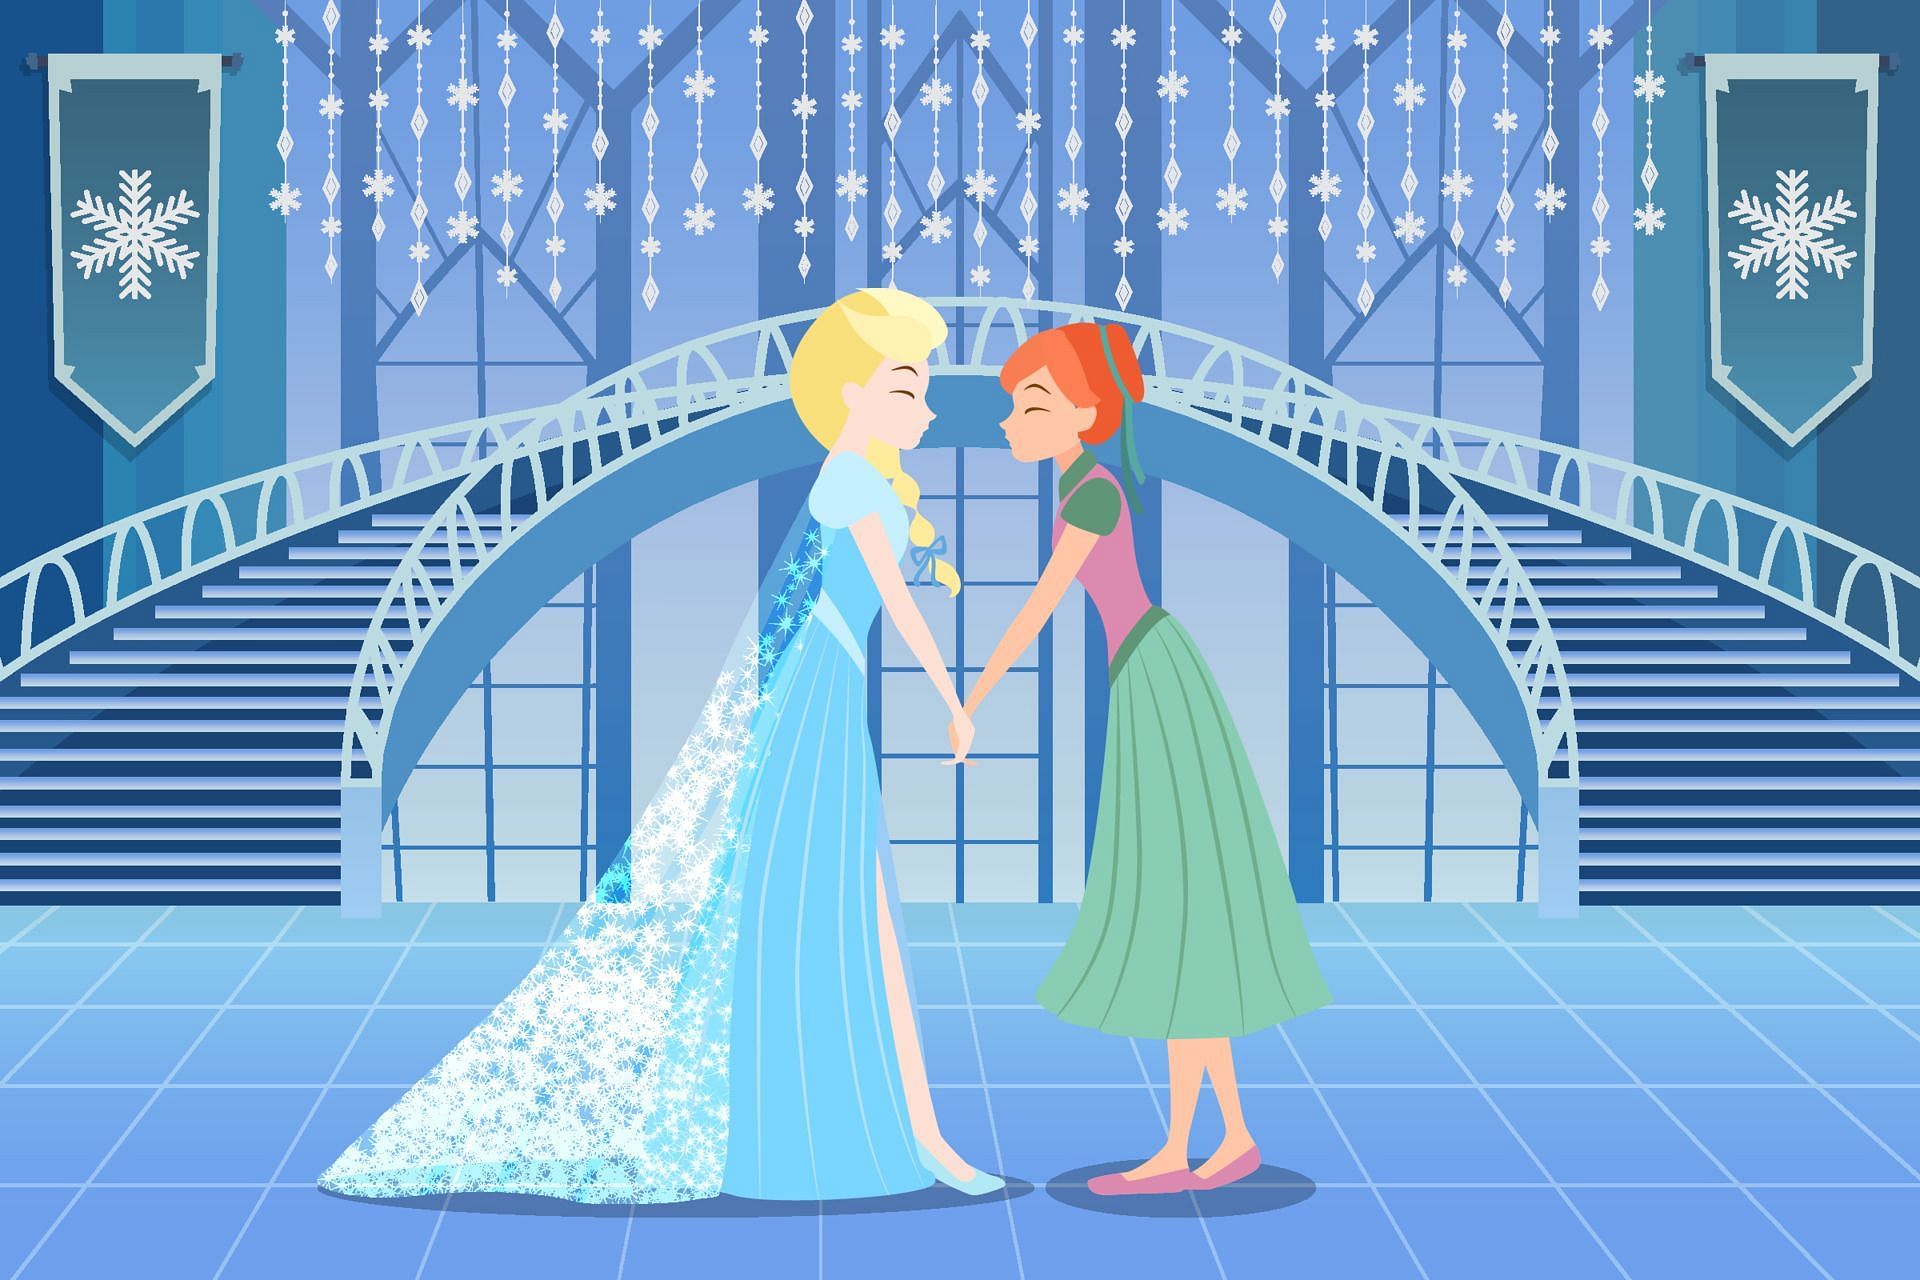 Elsa (left) and Anna (right) have different disney princess mental disorders. (Image via Vecteezy/ Vecteezy)